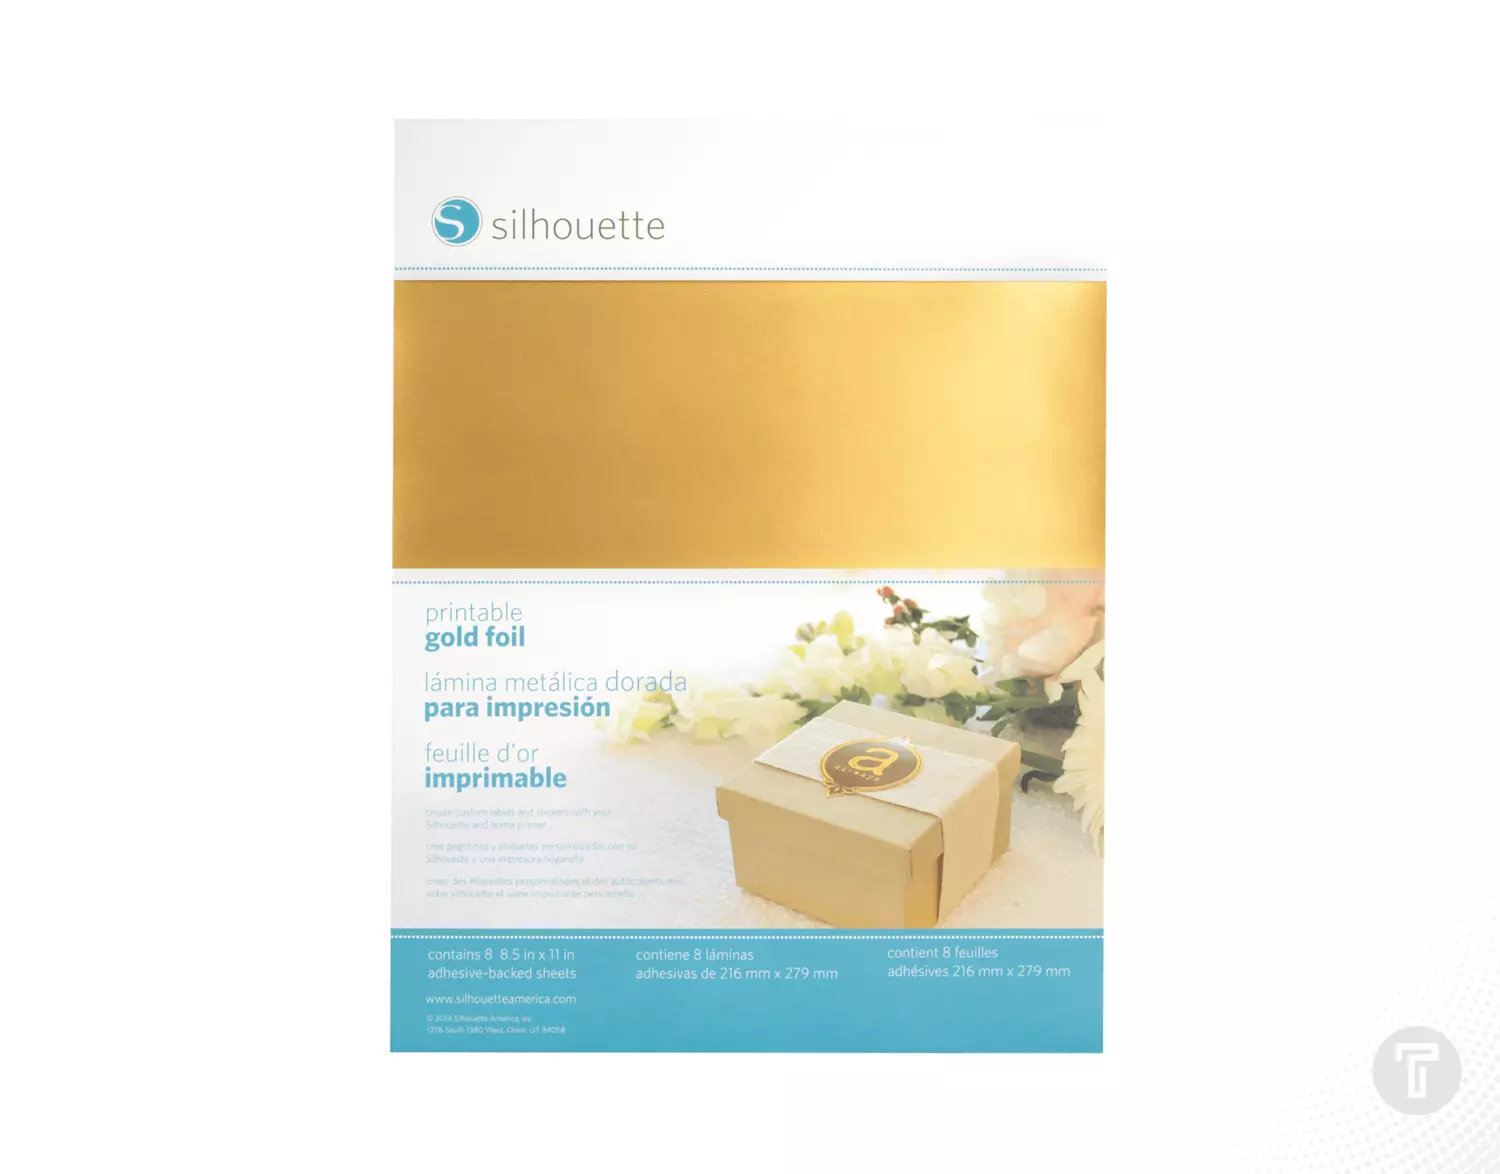 Silhouette printable gold foil